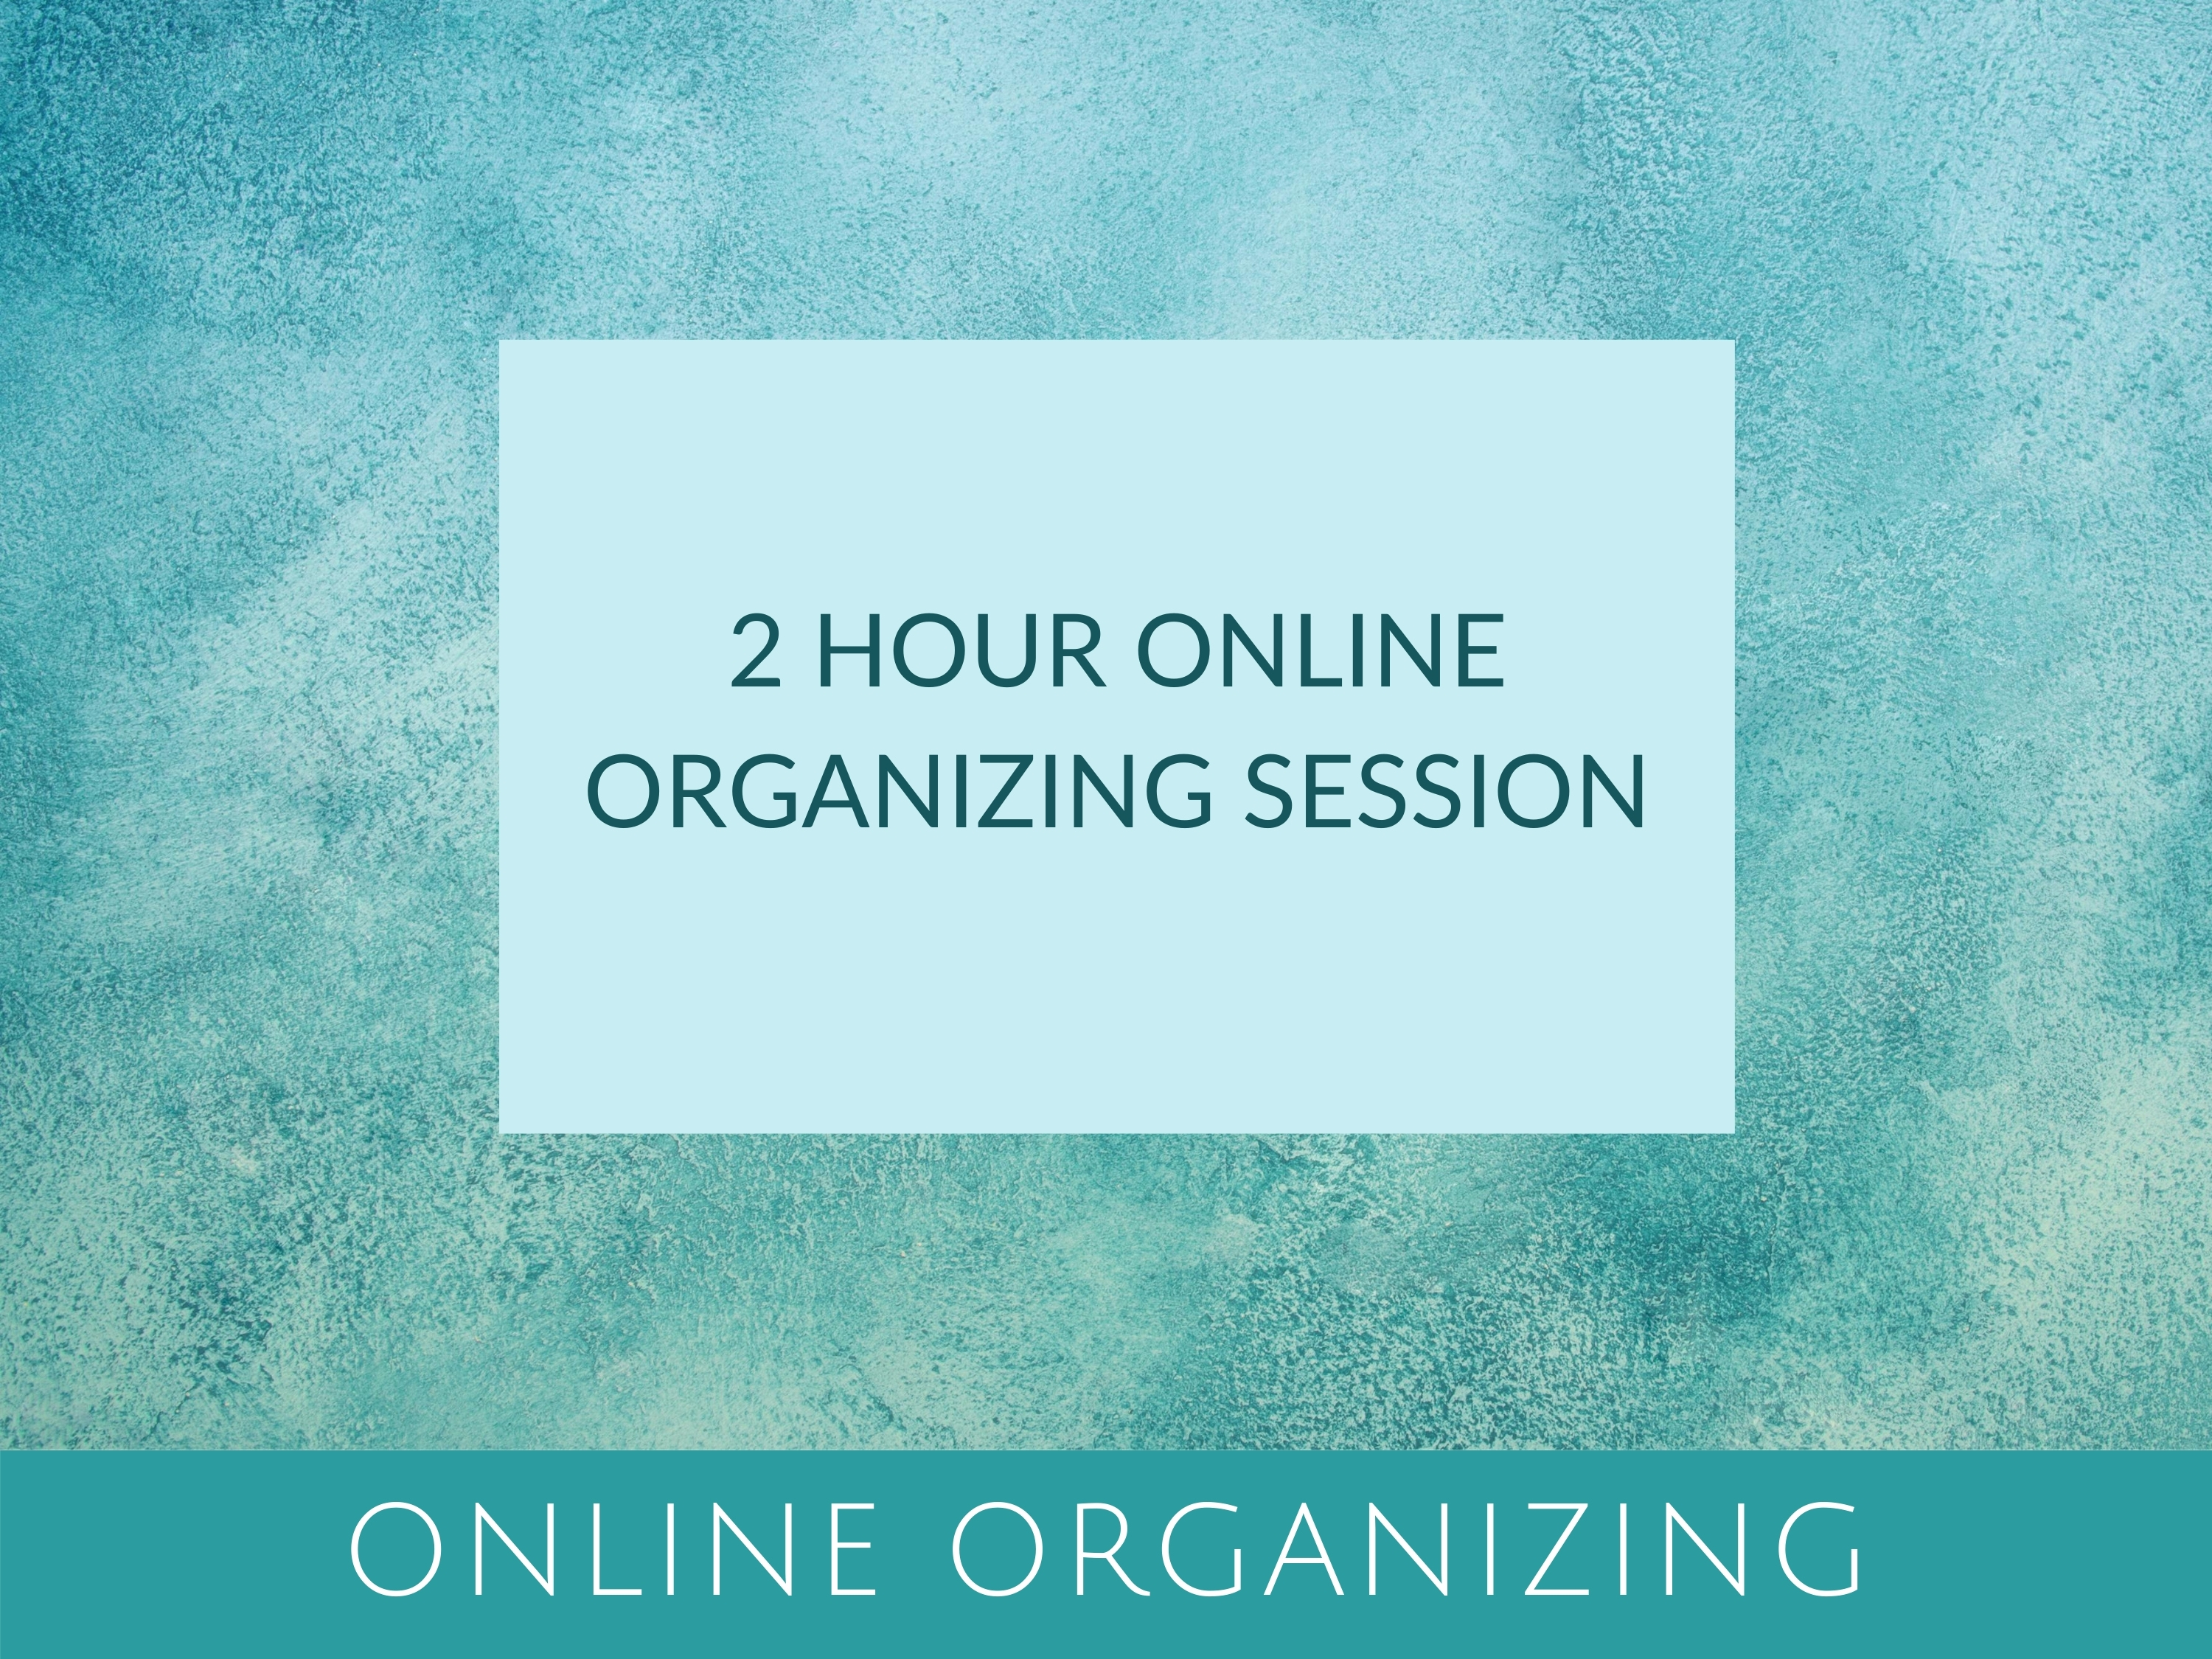 2 hour online organizing session